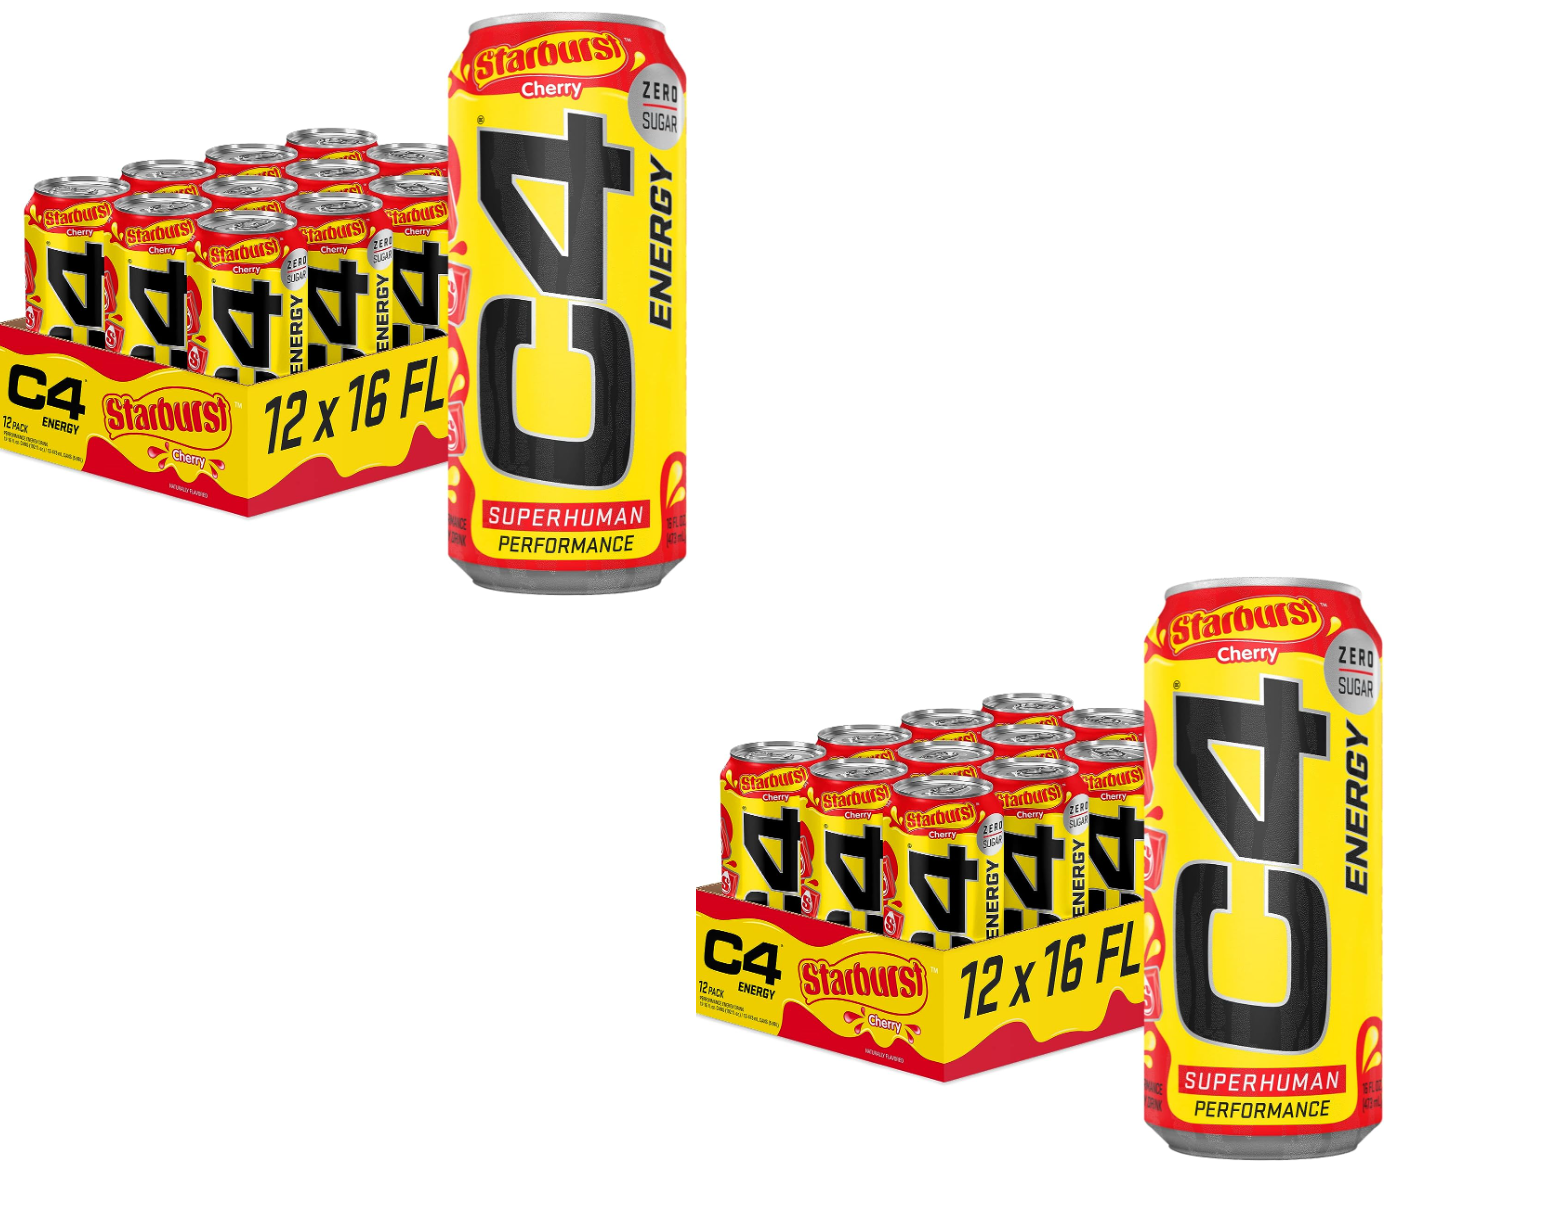 24-Count 16-Oz Cellucor C4 Carbonated Zero Sugar Energy Drinks (Starburst Cherry) $27.01 ($1.12 each) w/ S&S + Free shipping